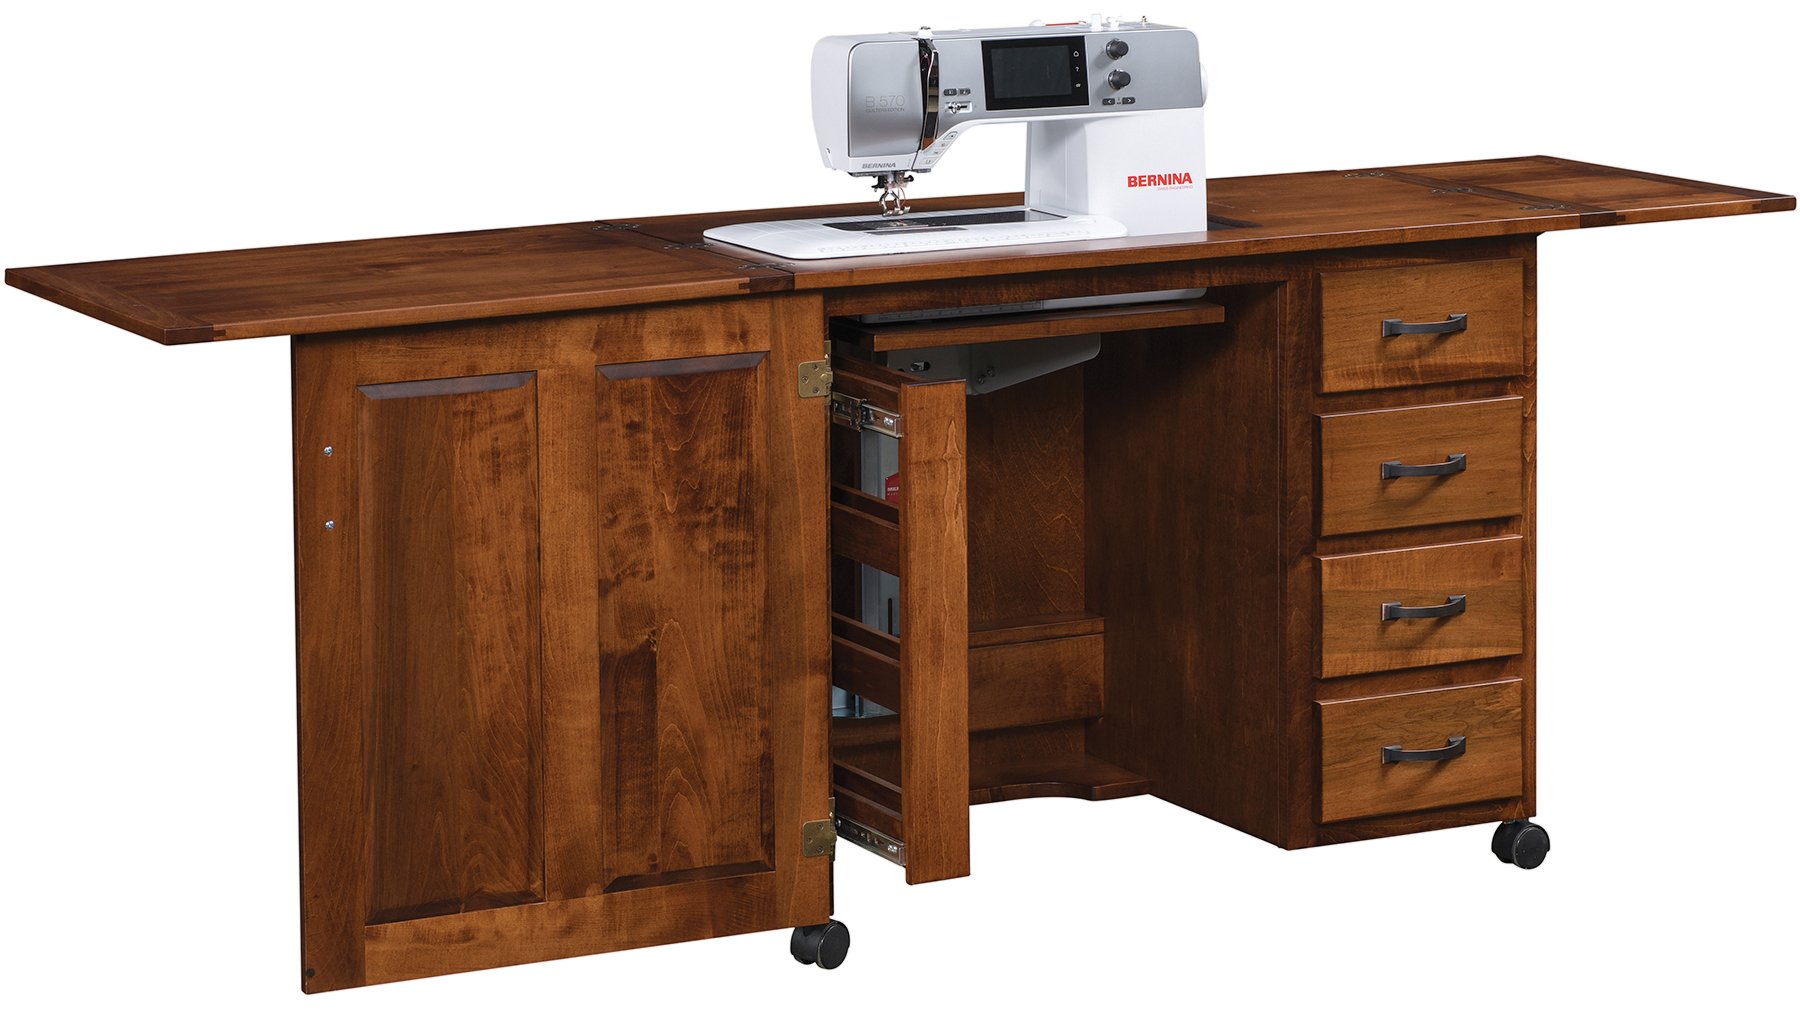 Sew & Go Sewing Table